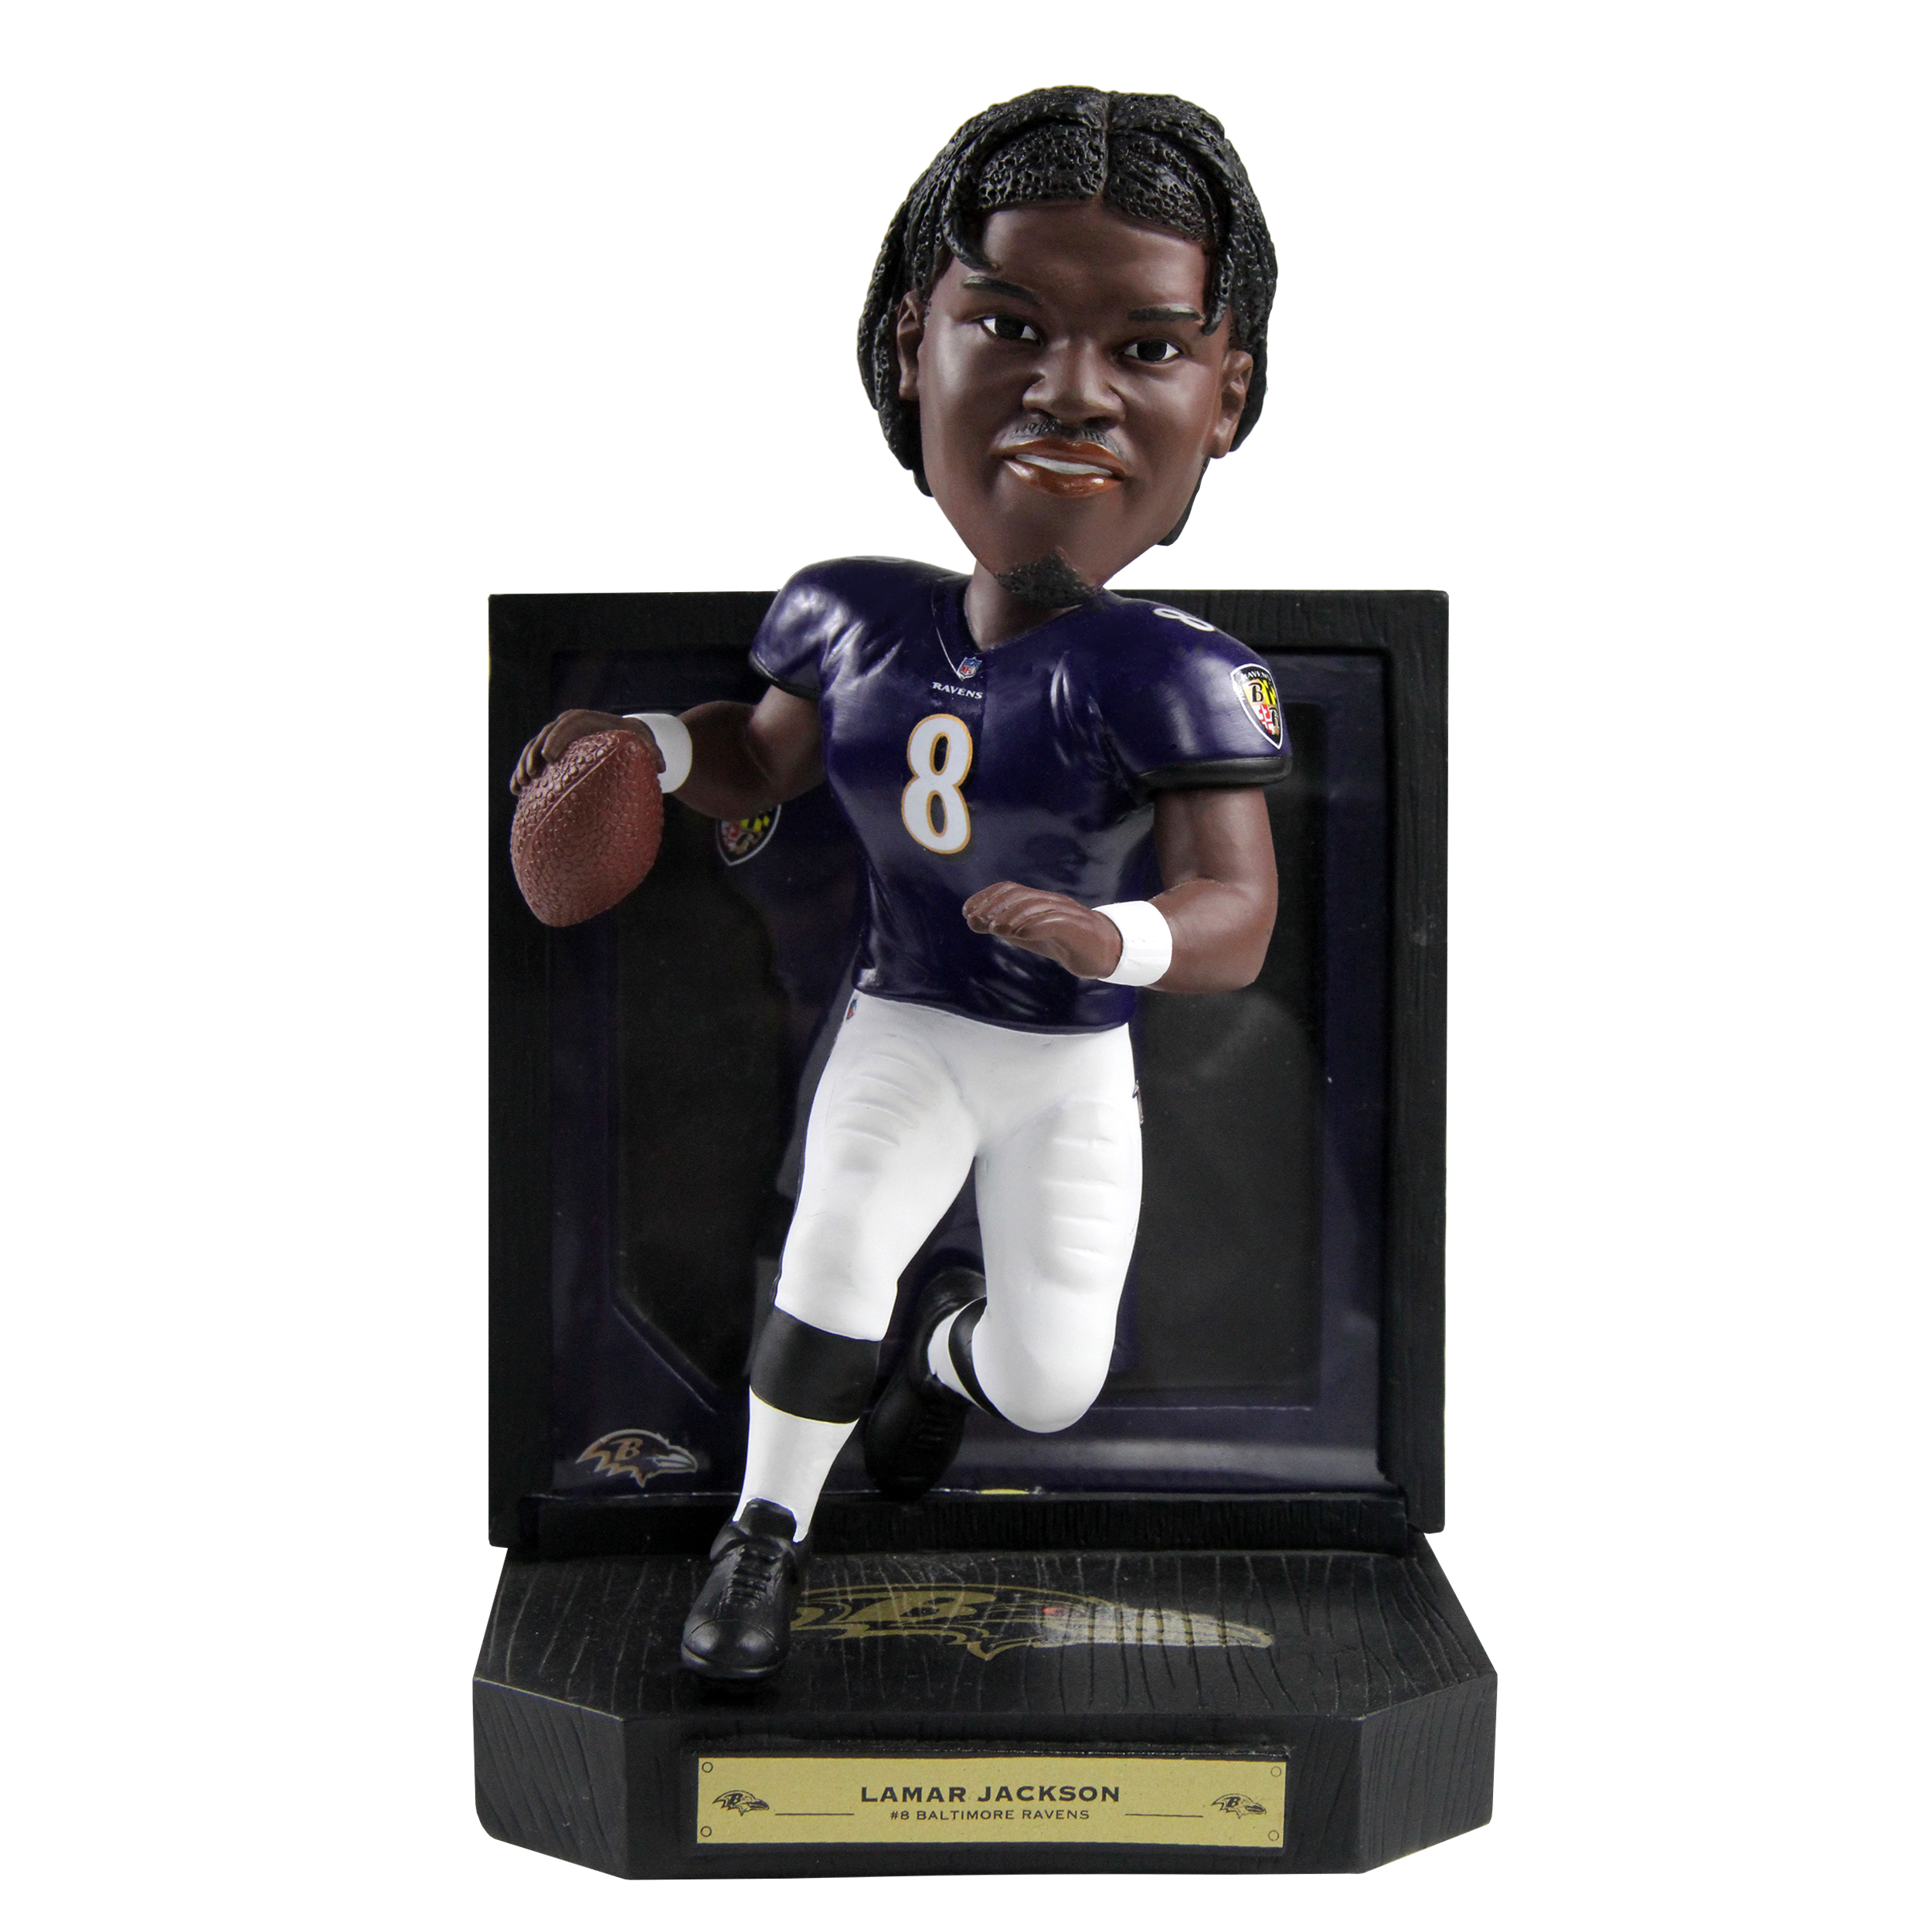 Lamar Jackson Bobbleheads  National Bobblehead Hall of Fame and